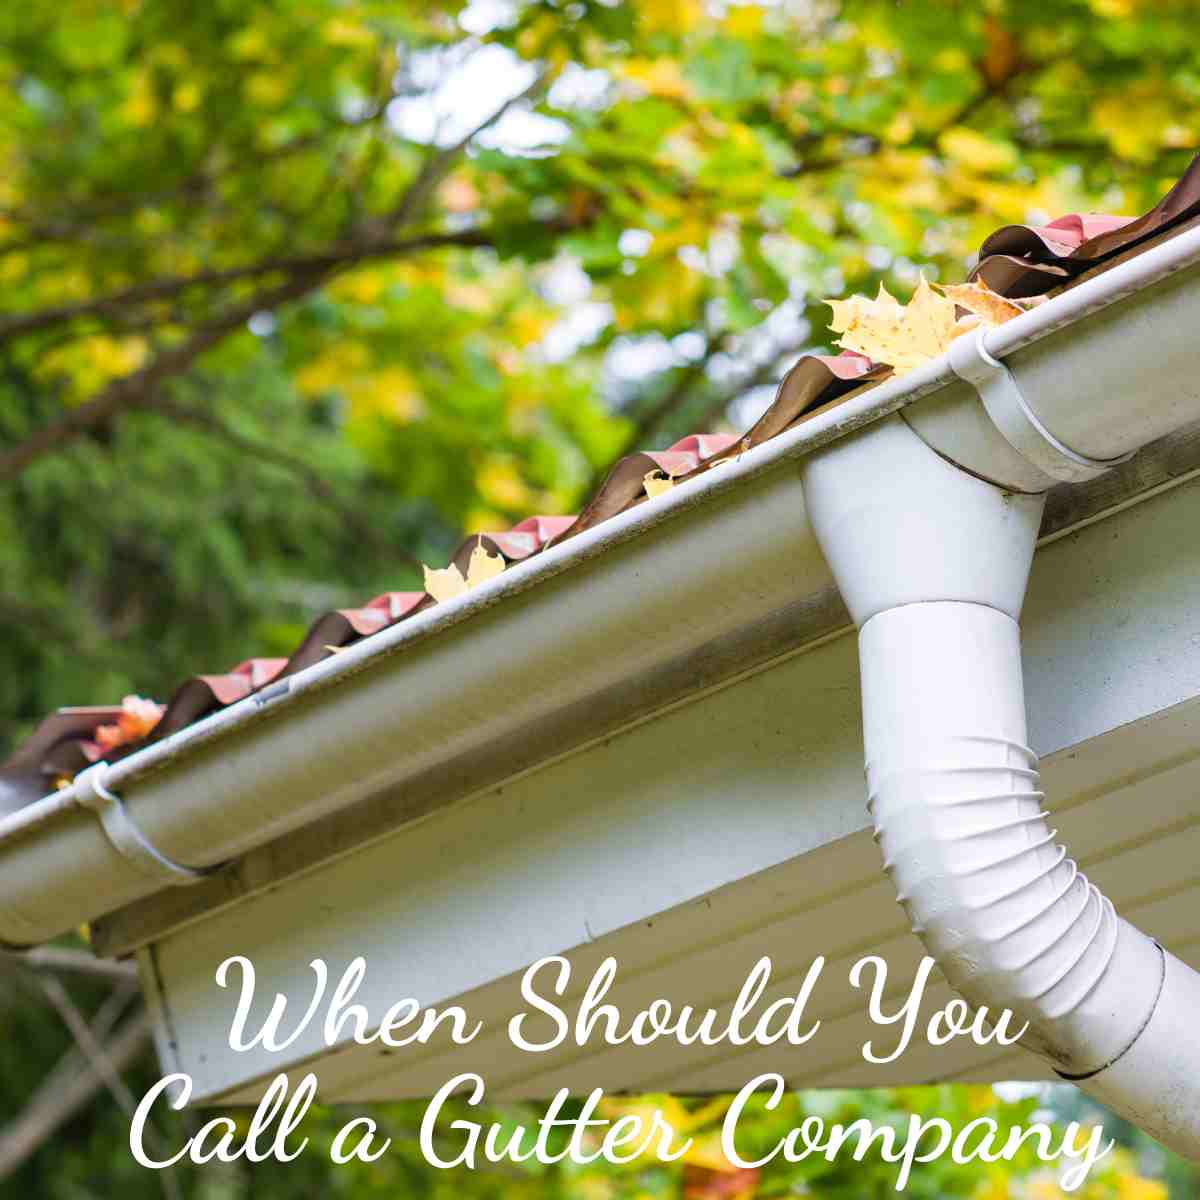 When Should You Call a Gutter Company